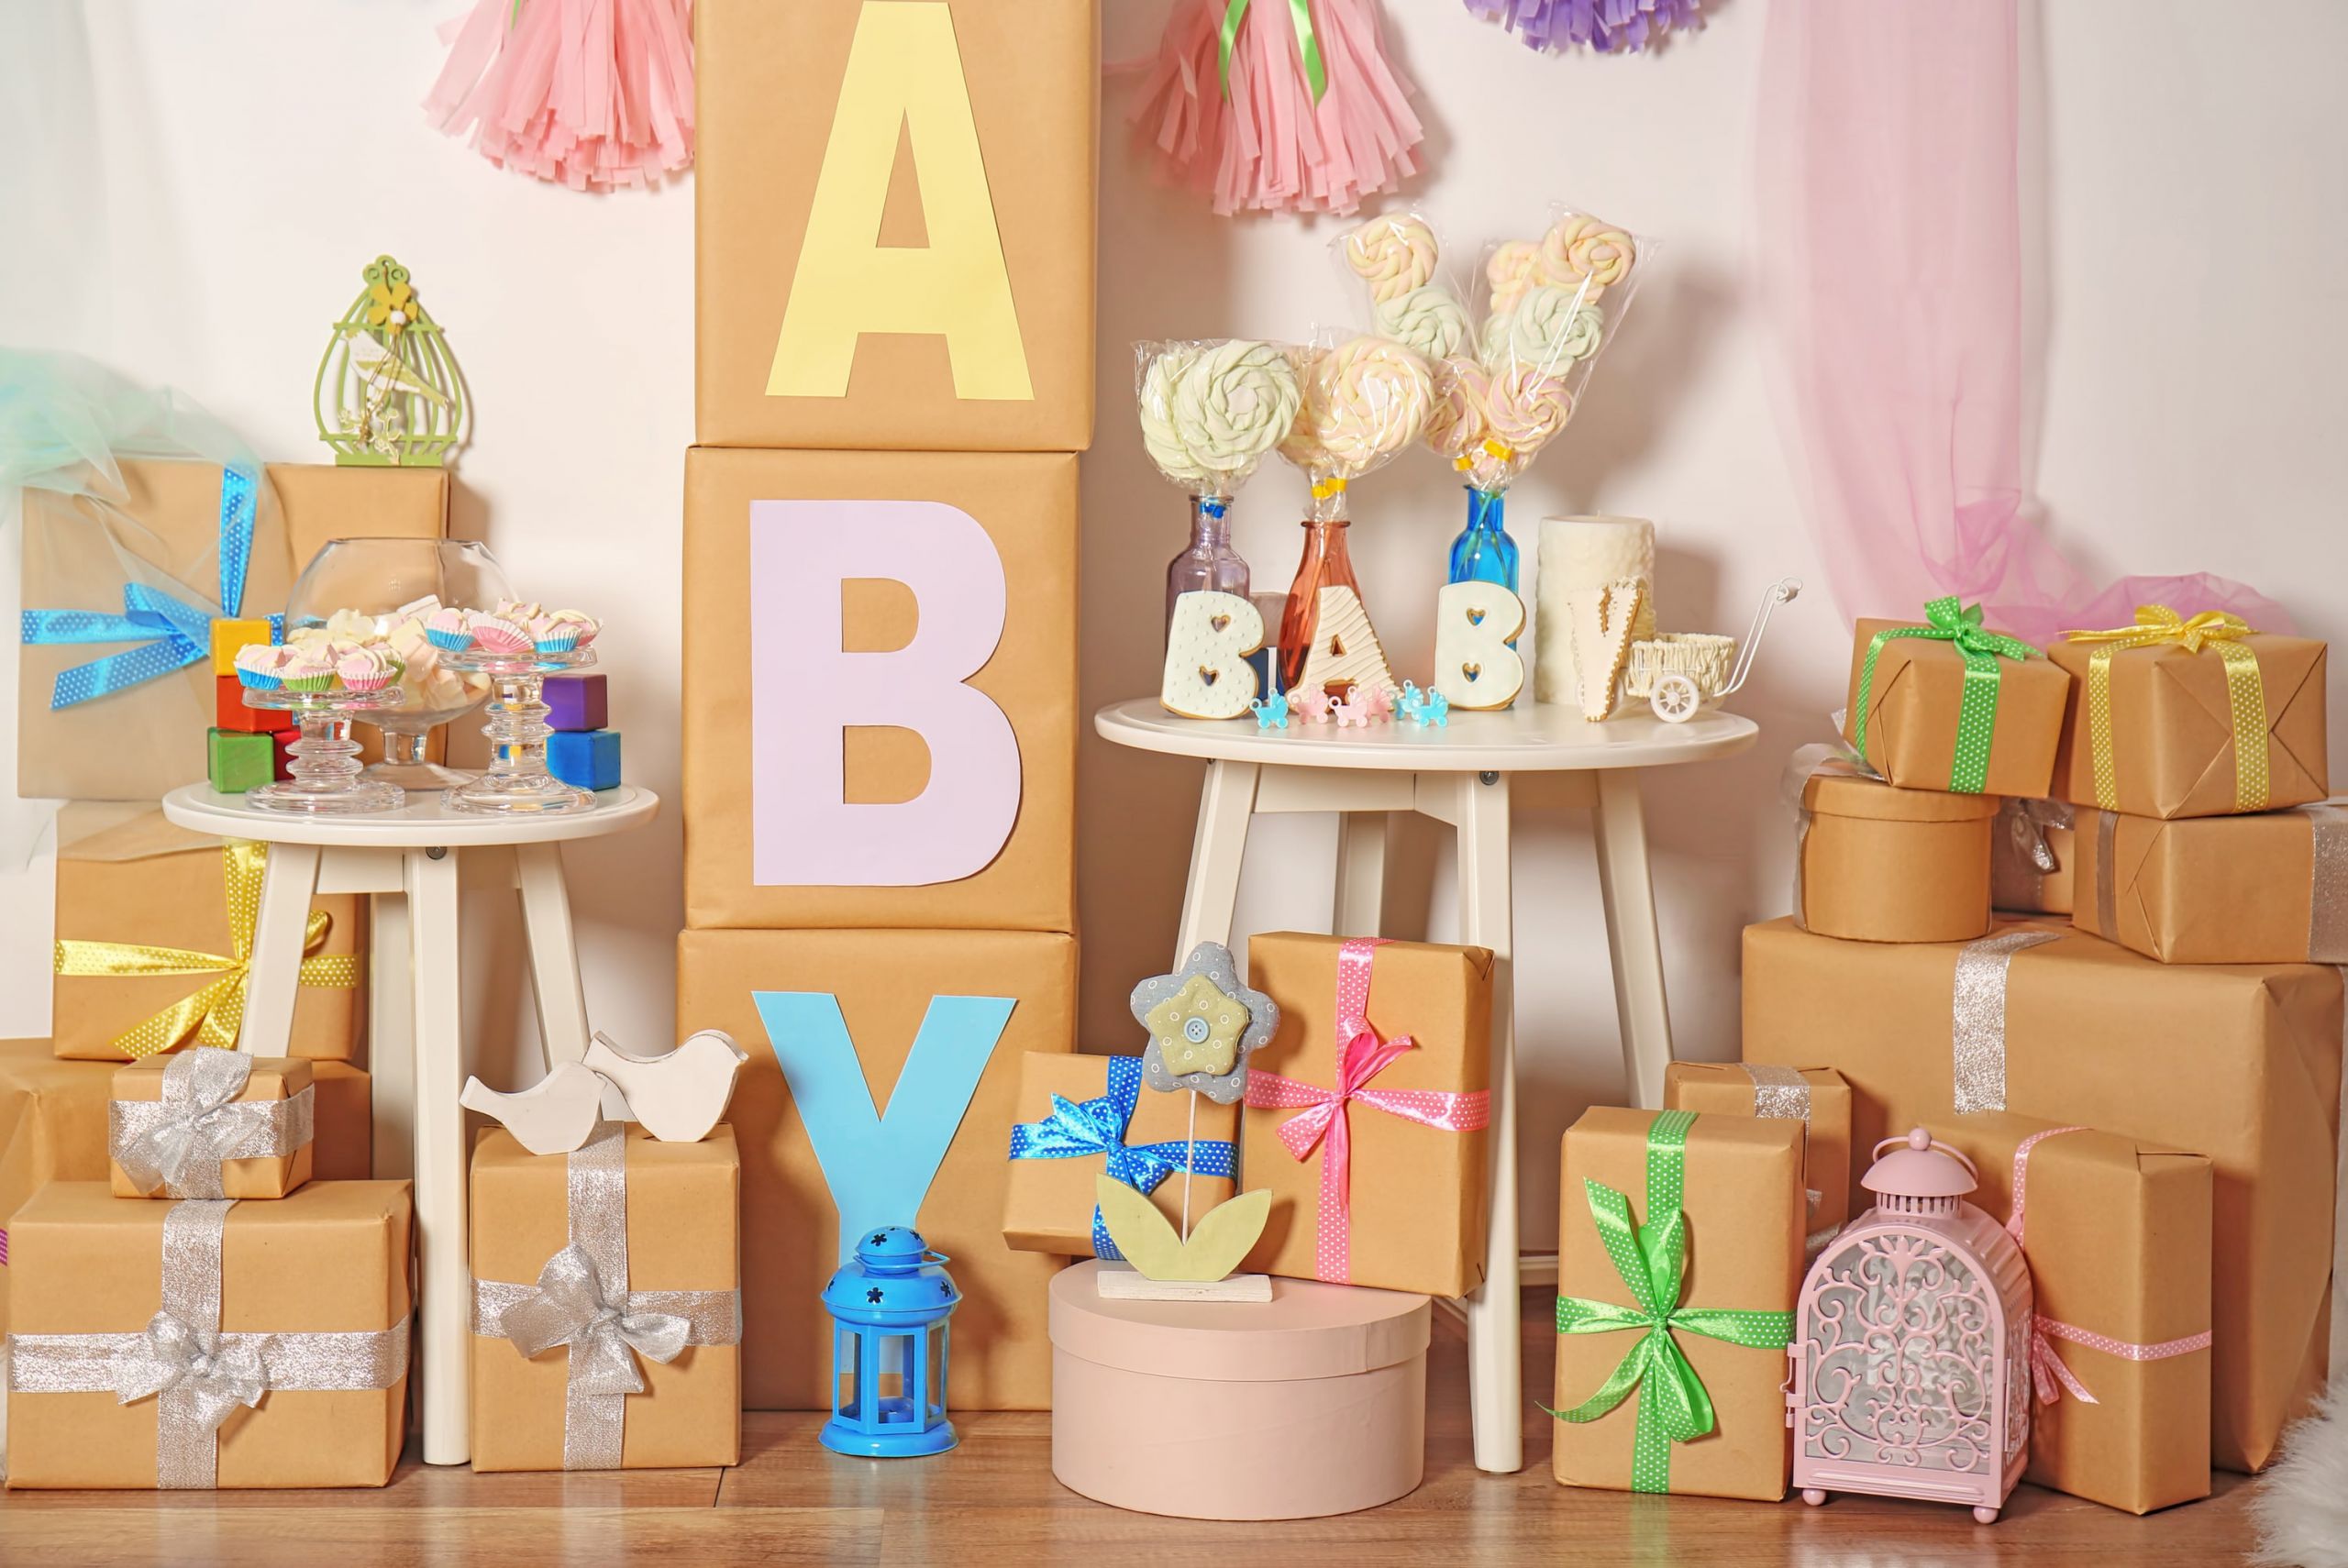 Baby Shower Decorating Ideas
 5 Cheap & Unique Baby Shower Decoration Ideas